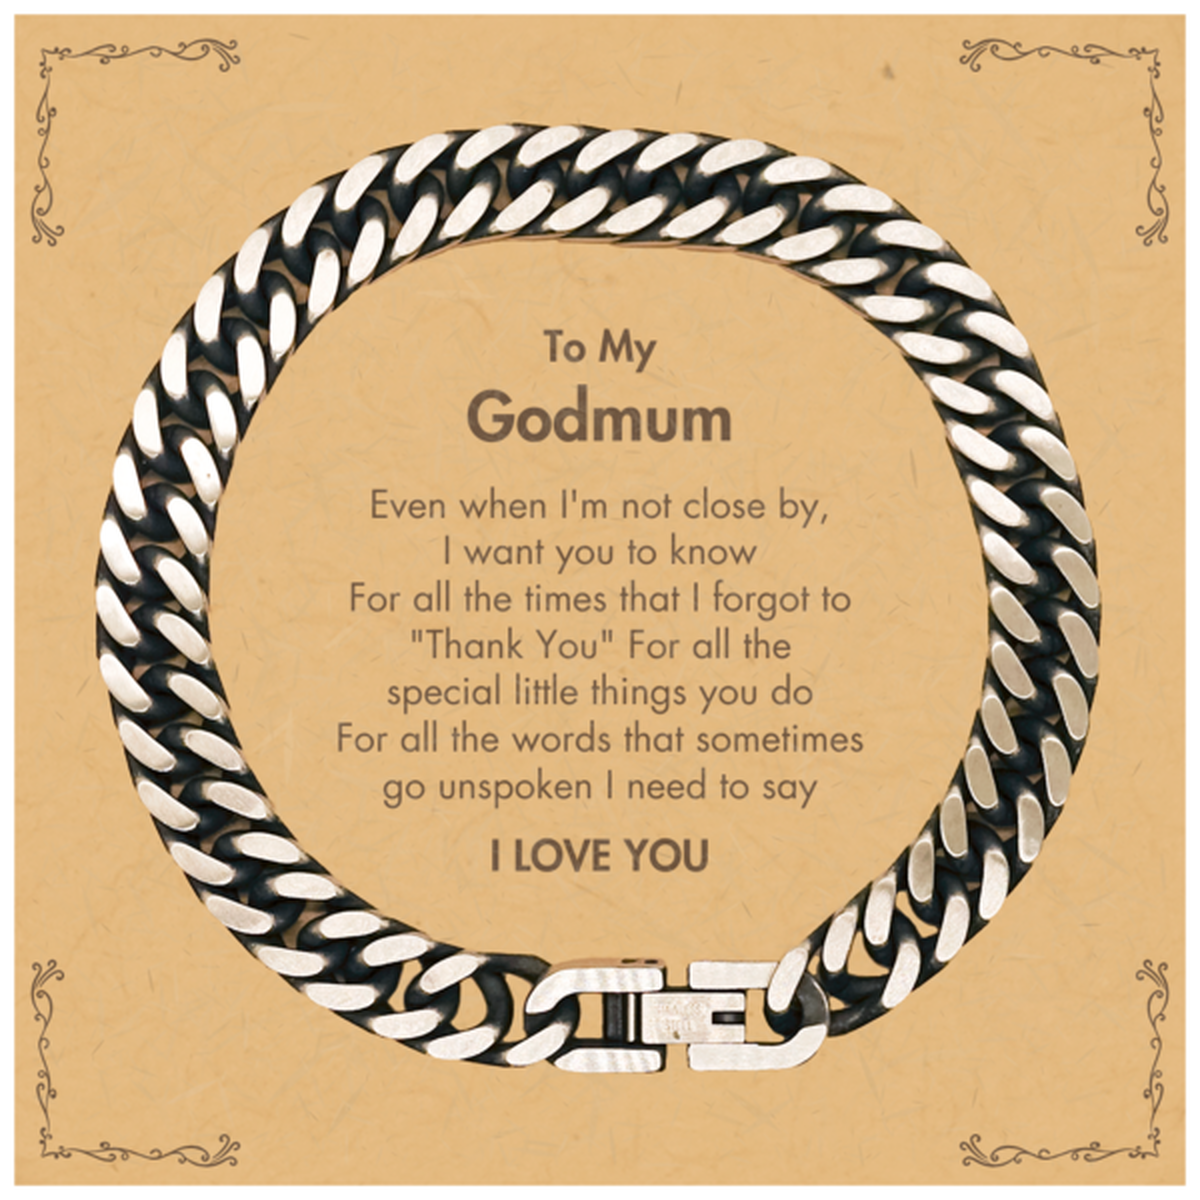 Thank You Gifts for Godmum, Keepsake Cuban Link Chain Bracelet Gifts for Godmum Birthday Mother's day Father's Day Godmum For all the words That sometimes go unspoken I need to say I LOVE YOU